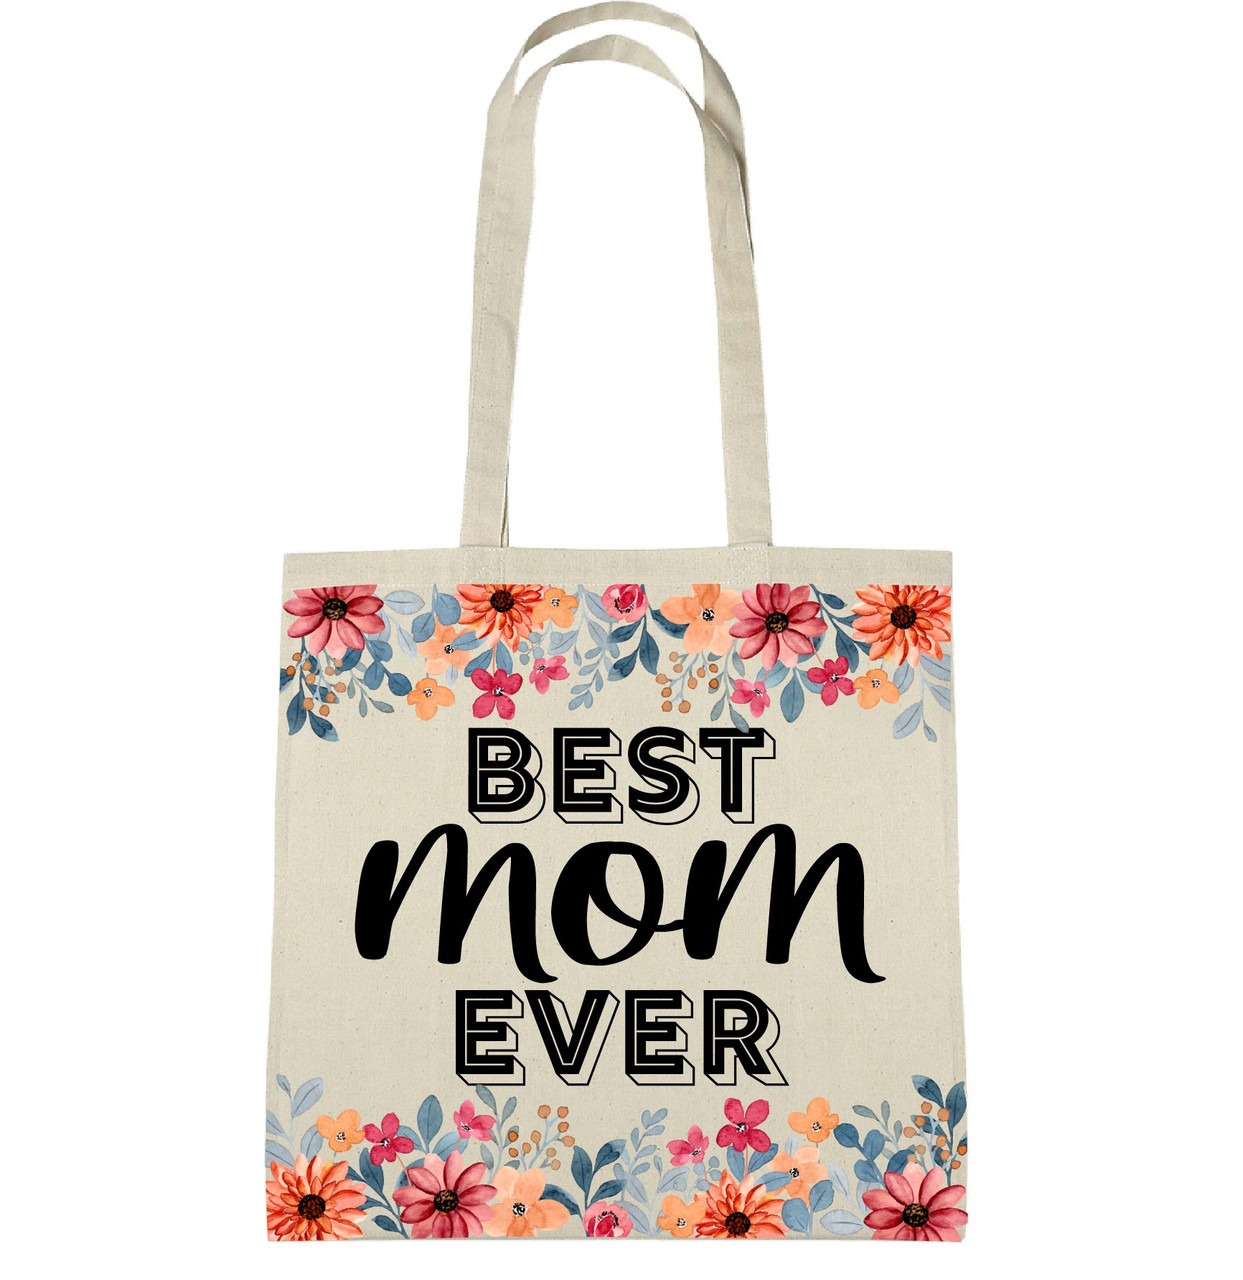 Best Mom Ever Canvas Tote Bag With Leather Straps